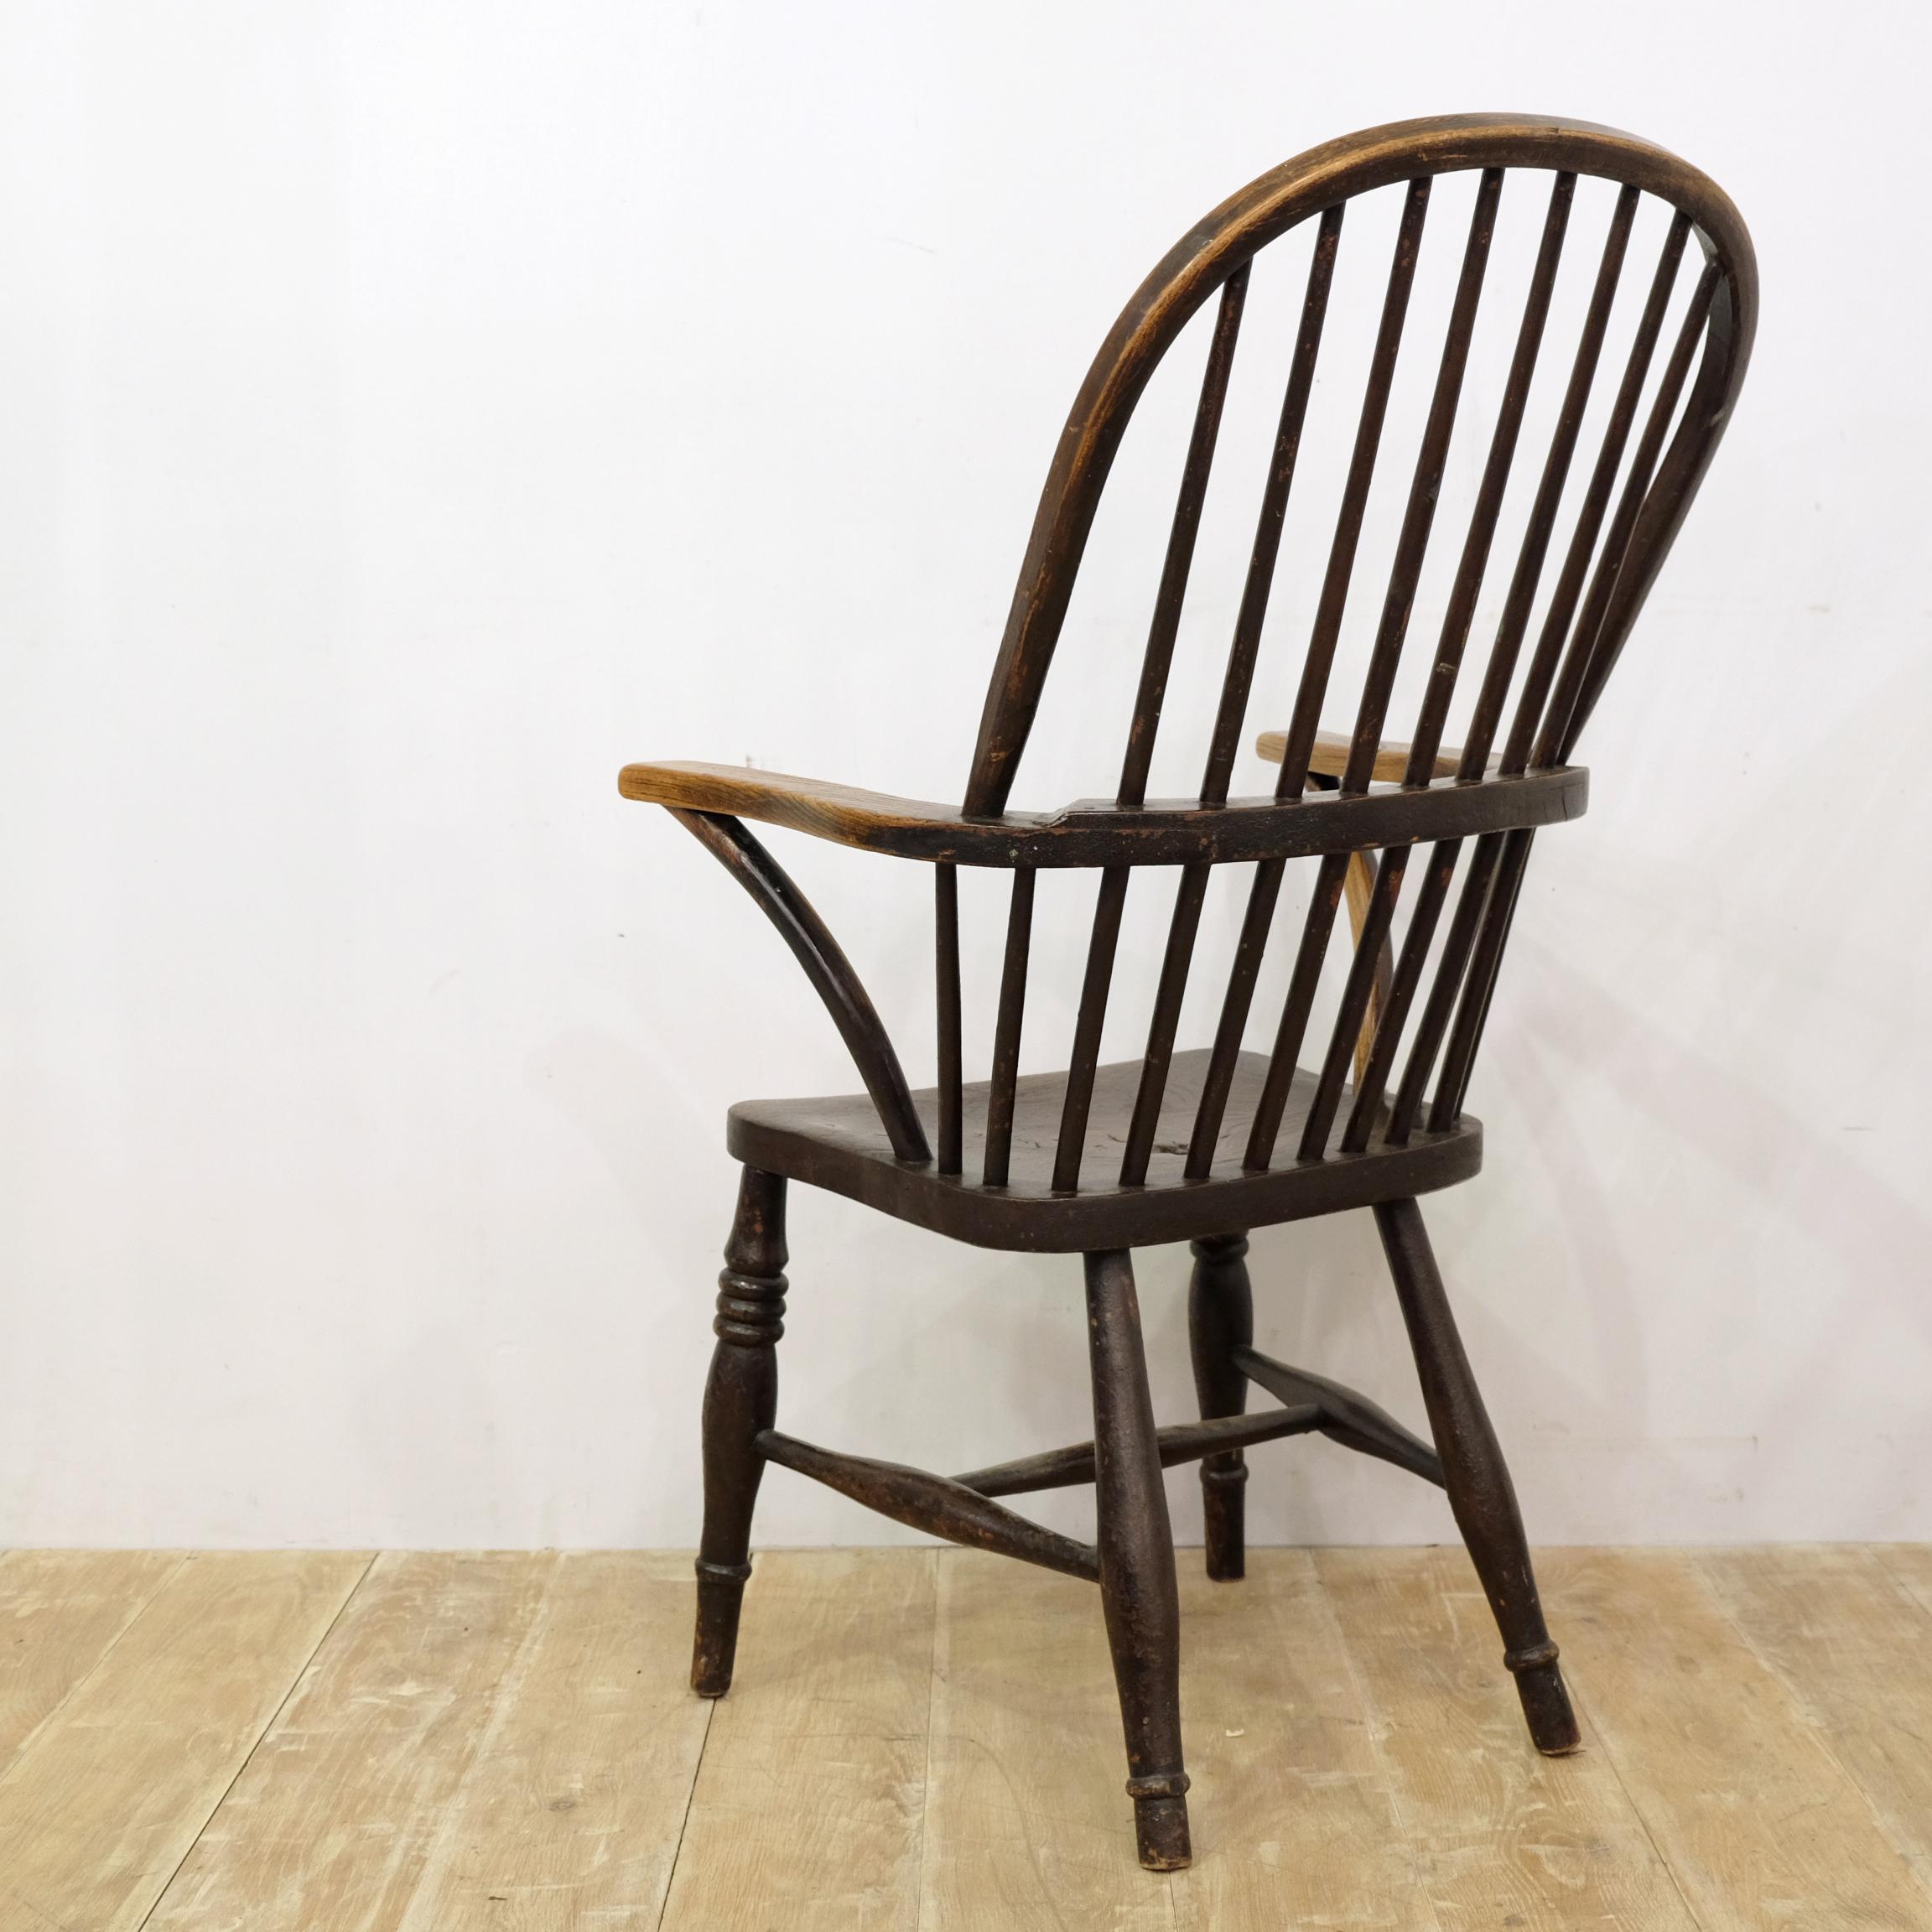 Mid-19th Century West Country Windsor Armchair, English, Devonshire, Elm and Ash, 1830s Chair